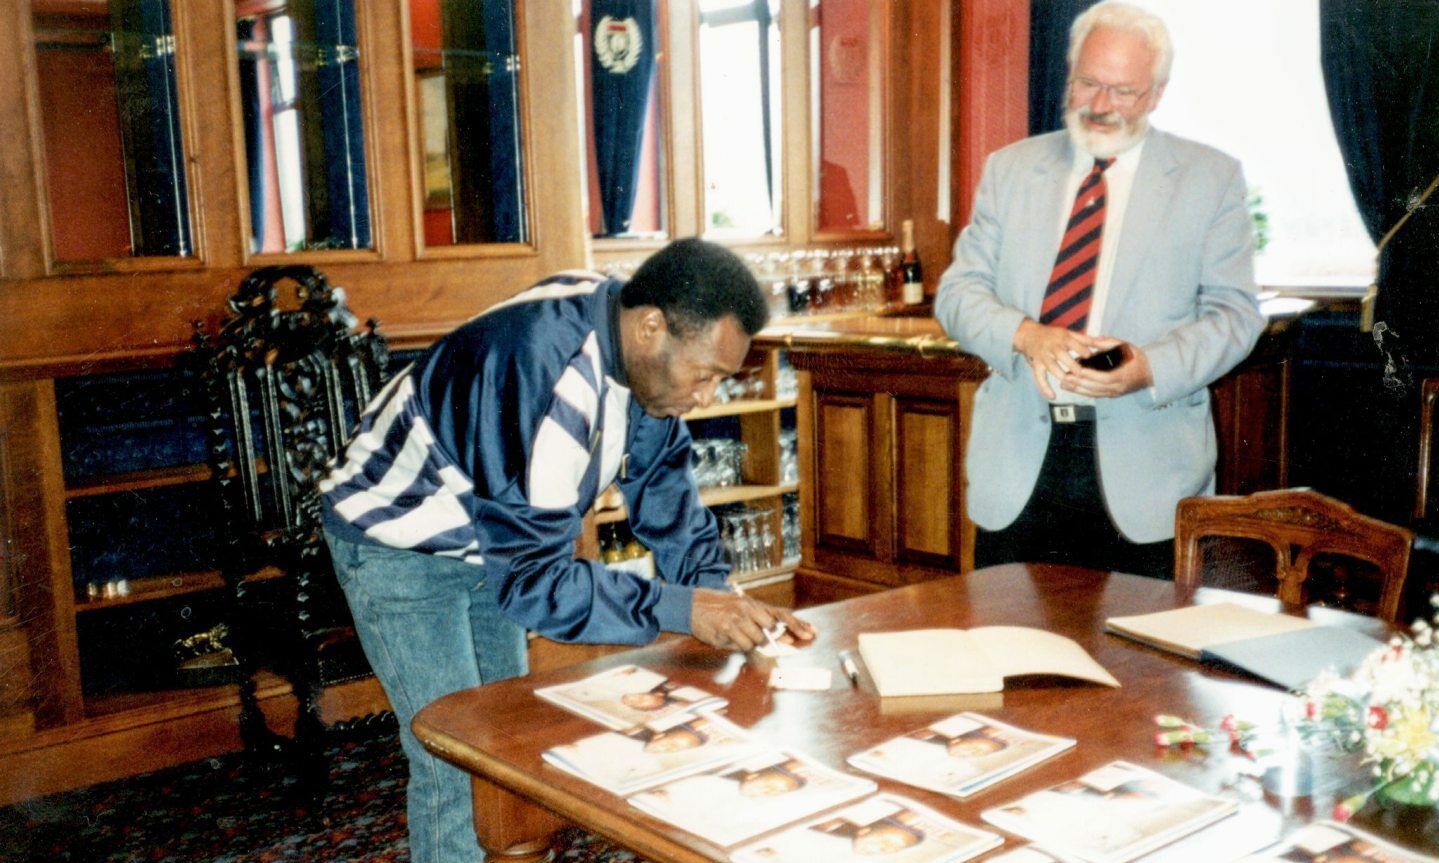 Pele in the Dens Park boardroom with Ian Gellatly on his visit to Dundee